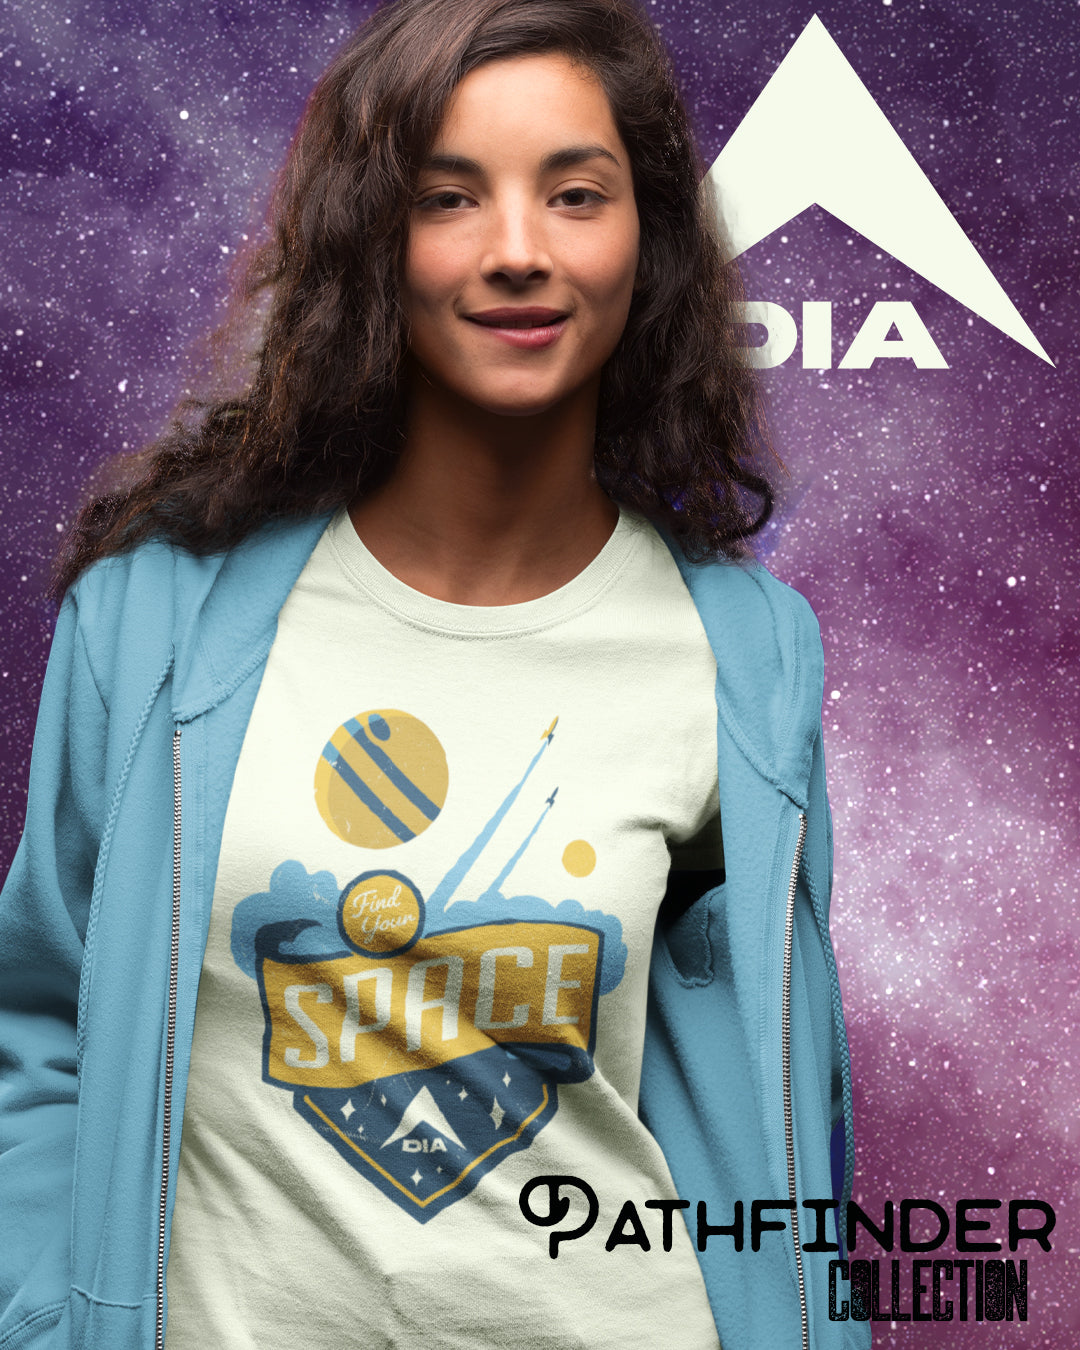 DIA Pathfinder Find Your Space Mens T-Shirt